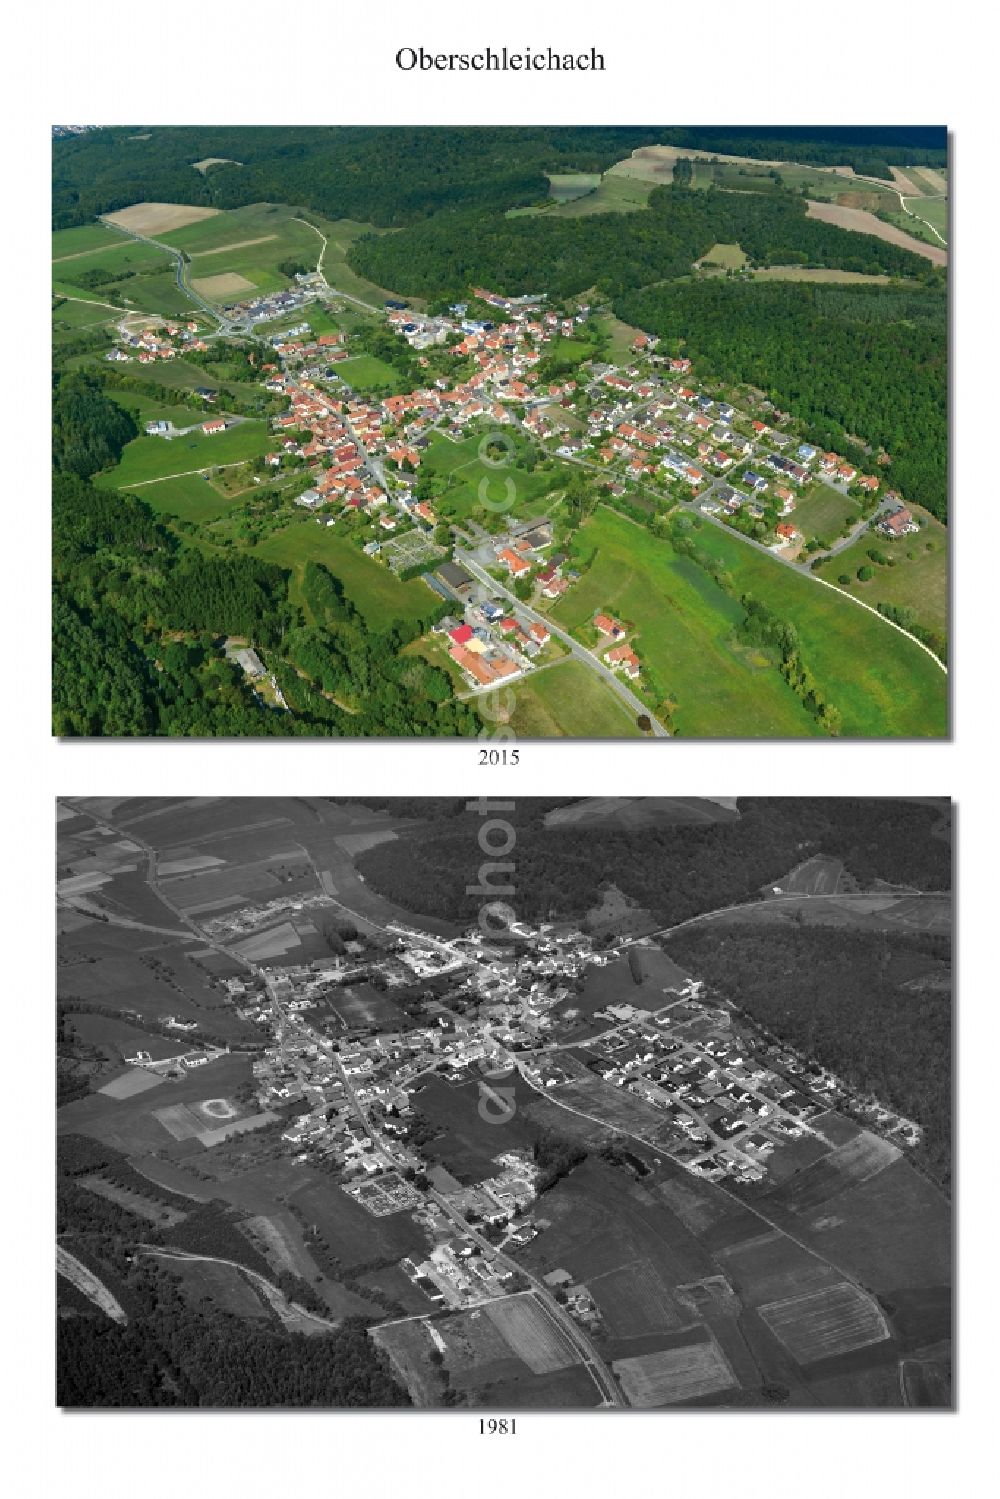 Oberschleichach from the bird's eye view: 1981 and 2015 village - view change of Oberschleichach in the state Bavaria